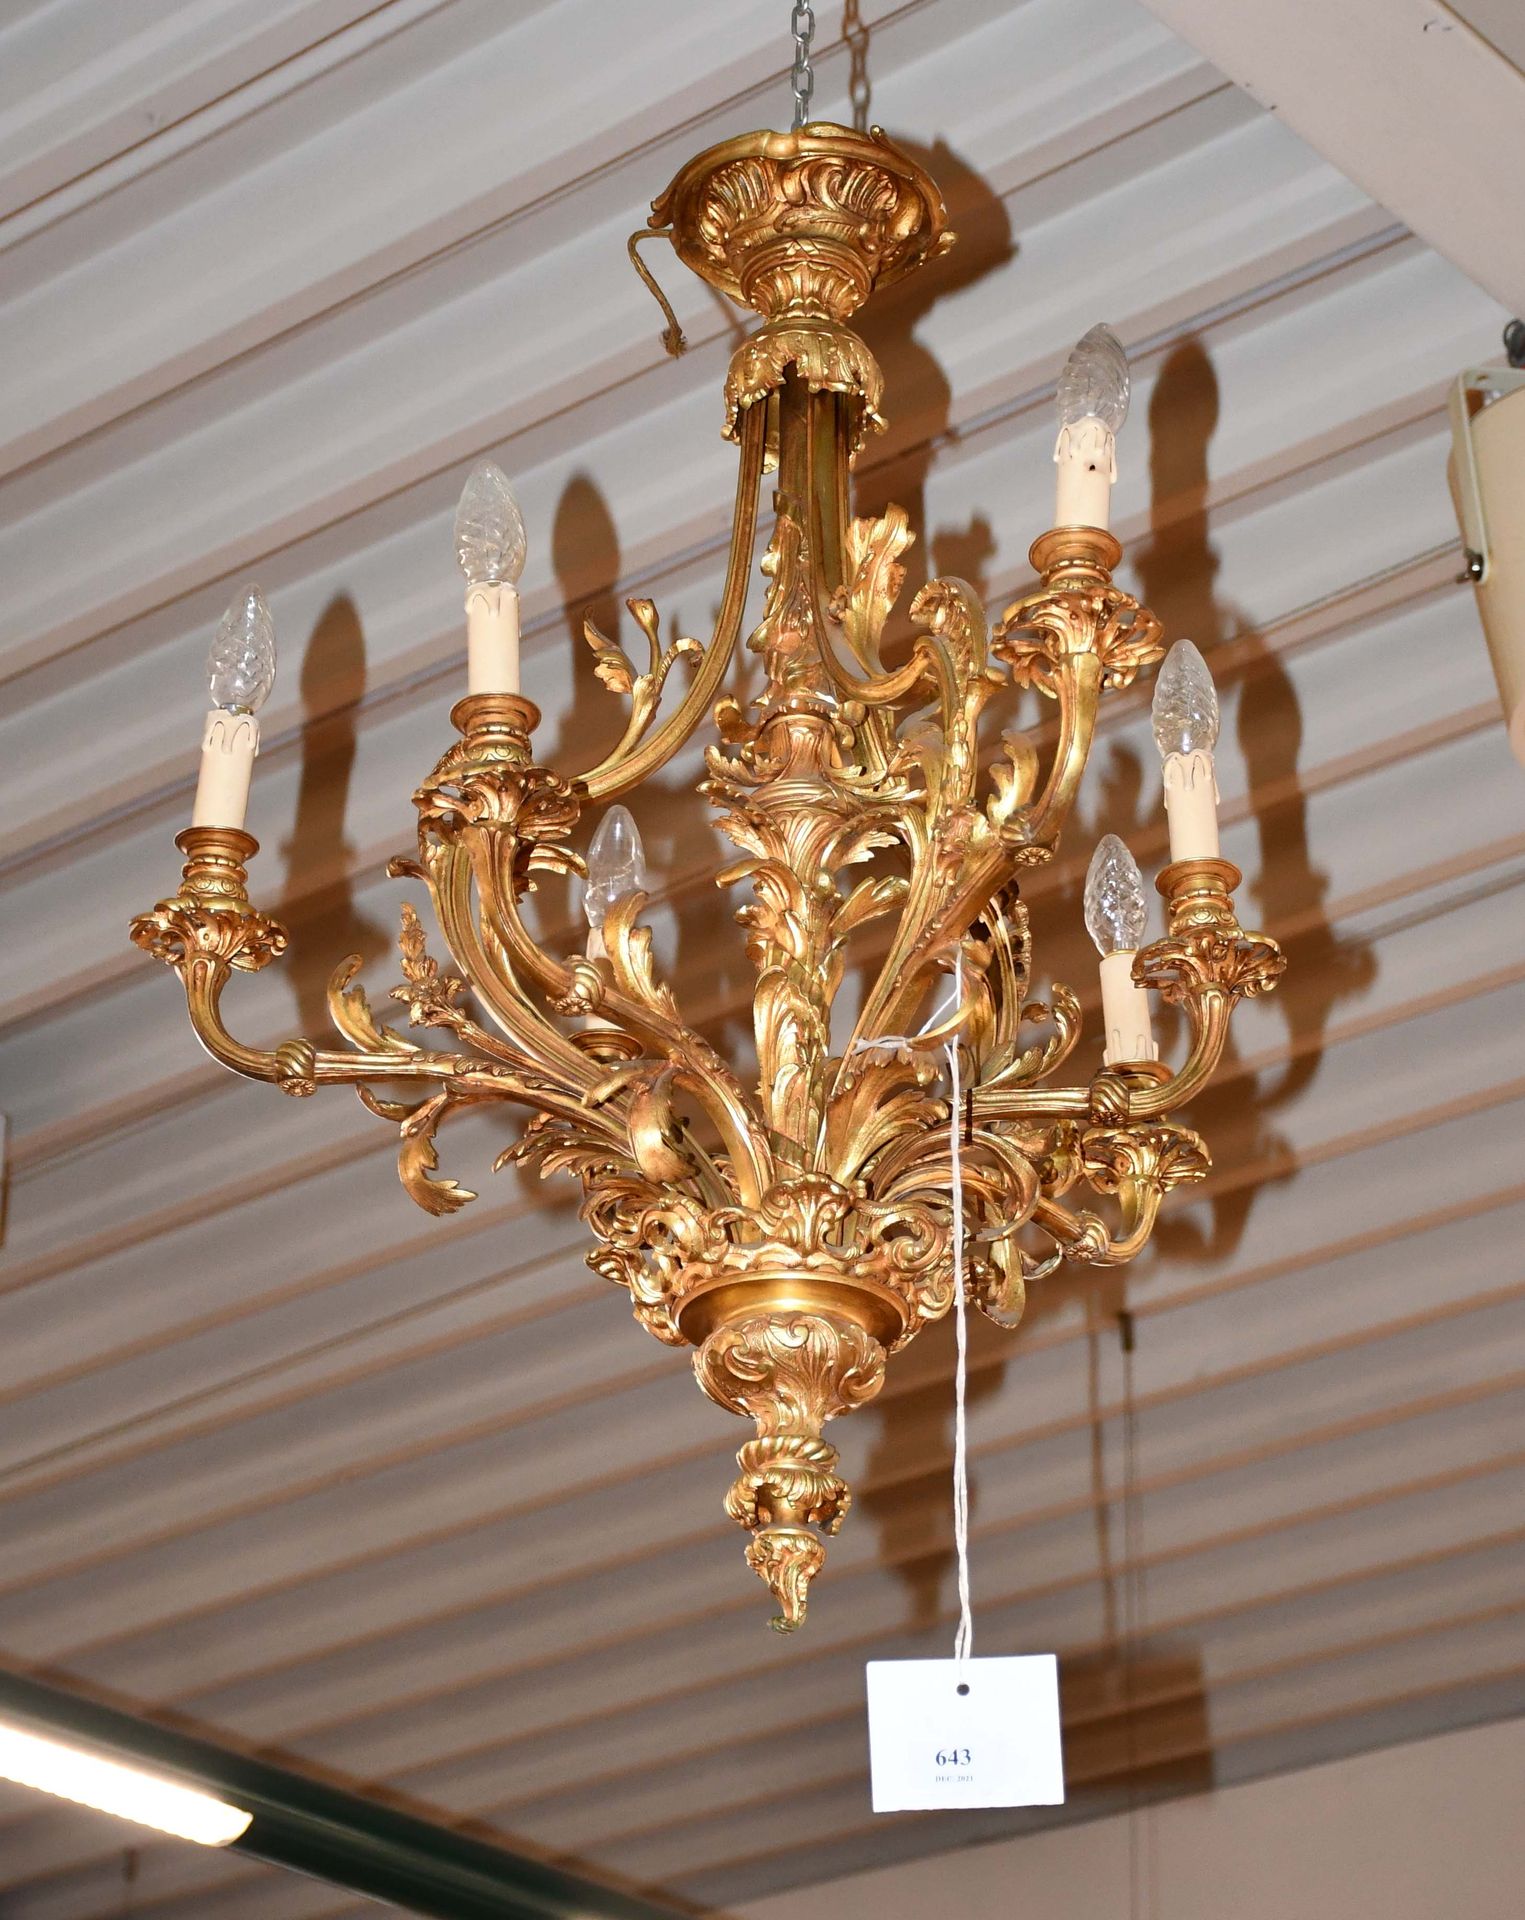 Null Gilt bronze chandelier in the Louis XV style, with six arms of light